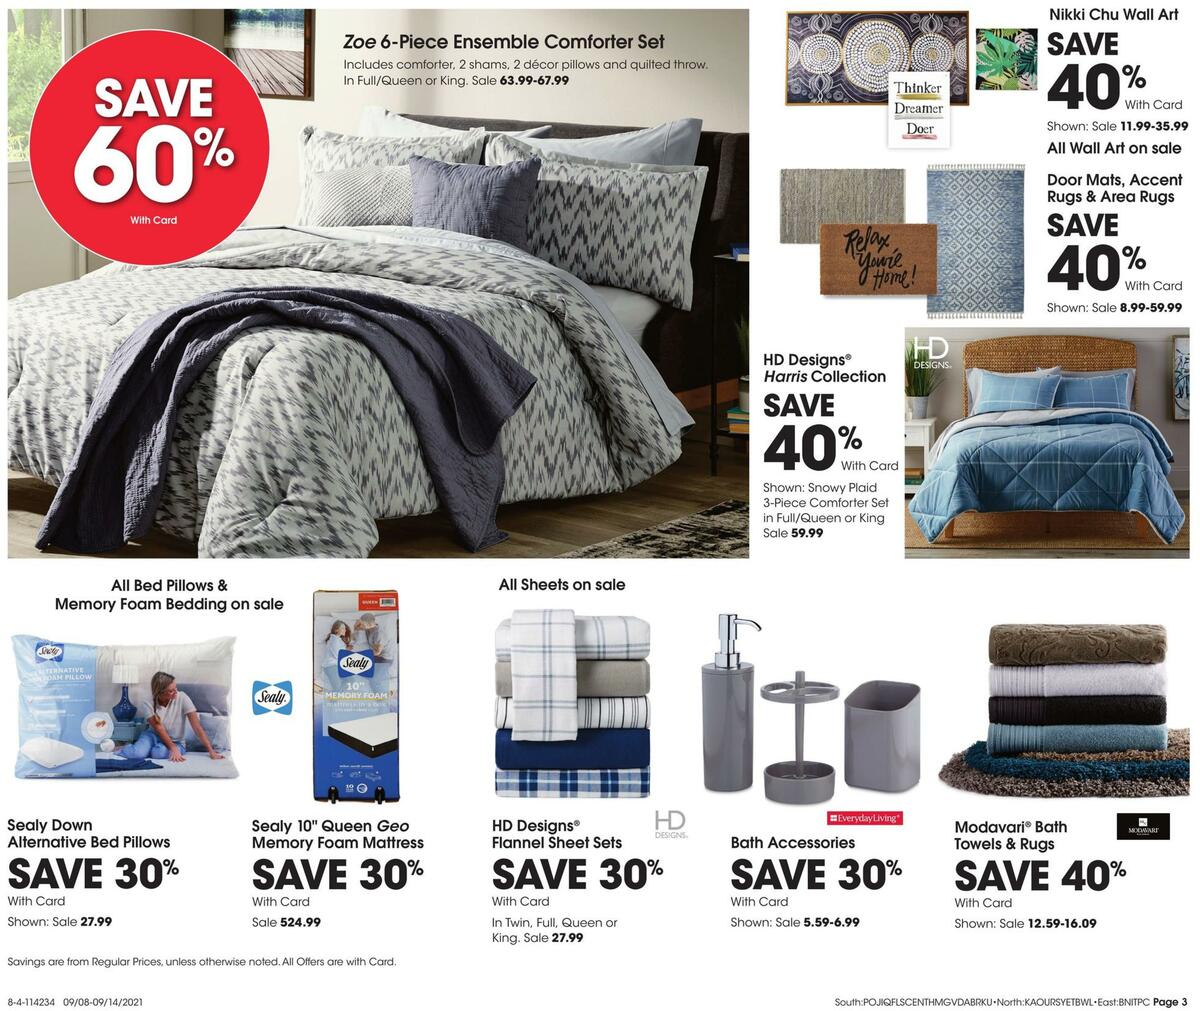 Fred Meyer General Merchandise Weekly Ad from September 8